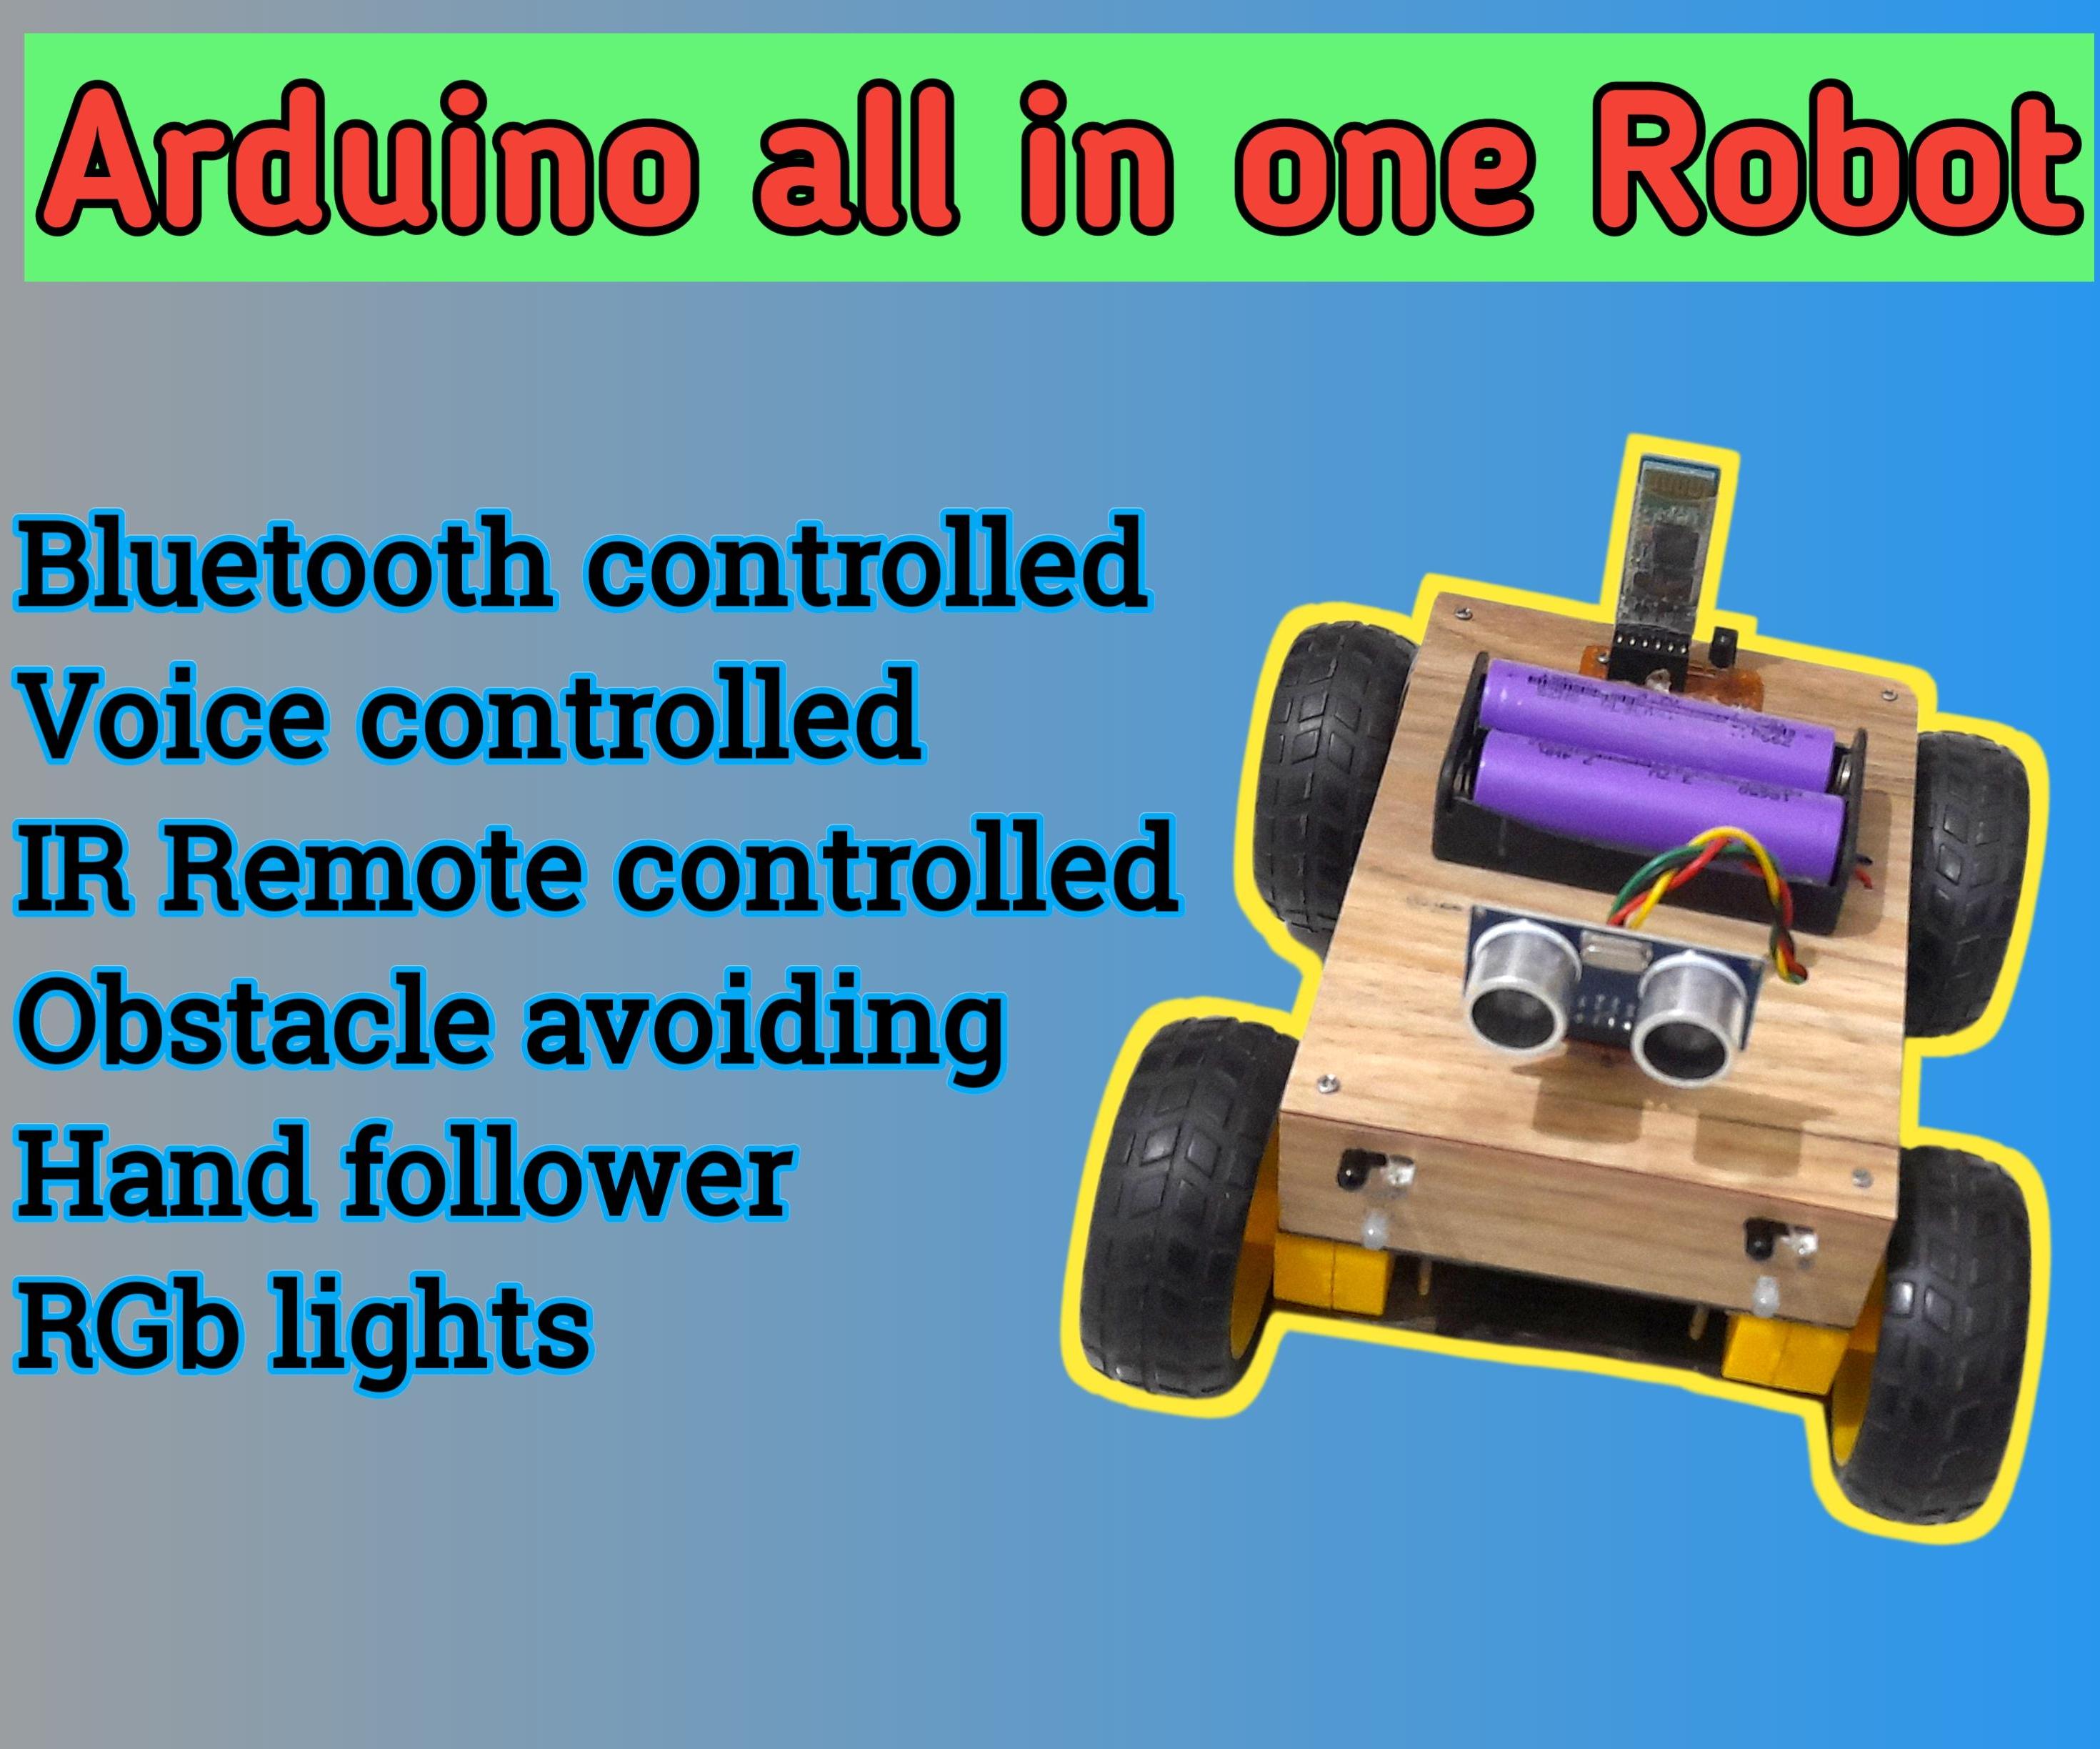 DIY Arduino All-in-One Robot Car: Control With Bluetooth, Voice, IR, Gestures, Avoid Obstacles, Follow Hand